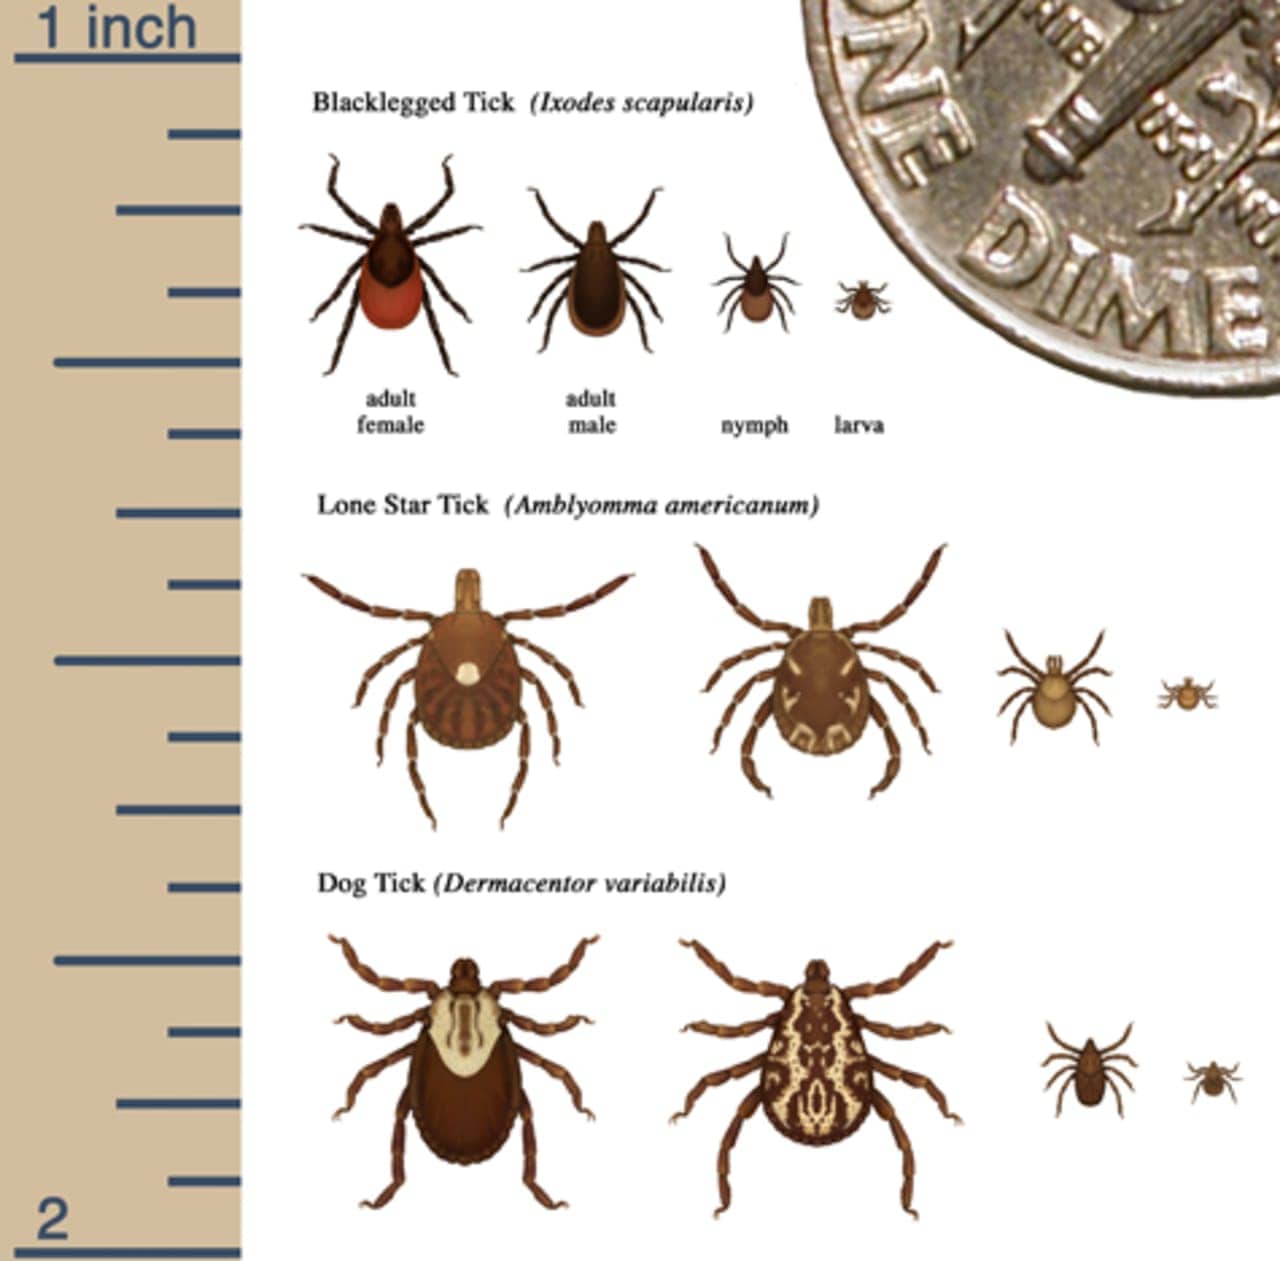 A look at tick sizes compared to the size of a dime (upper right corner).